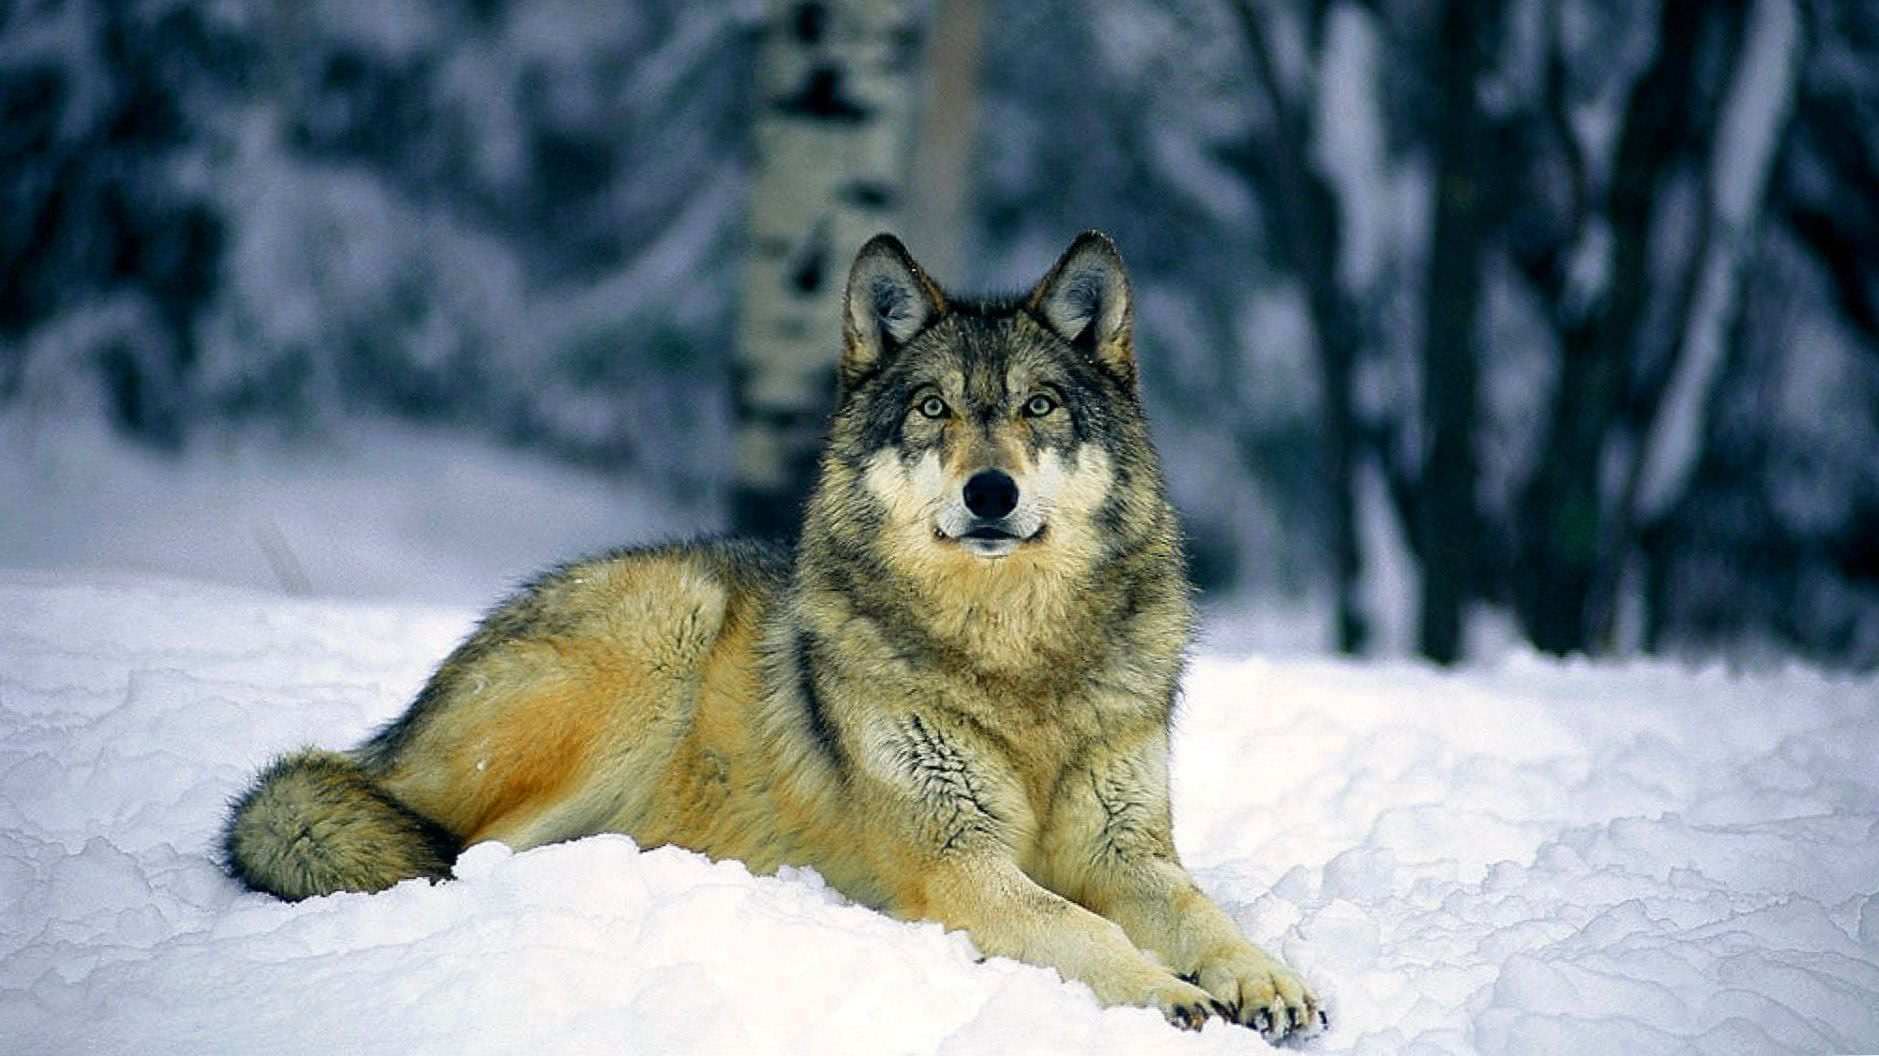 HD Wallpapers 1080p Of Wolf - Wolf-Wallpapers.pro